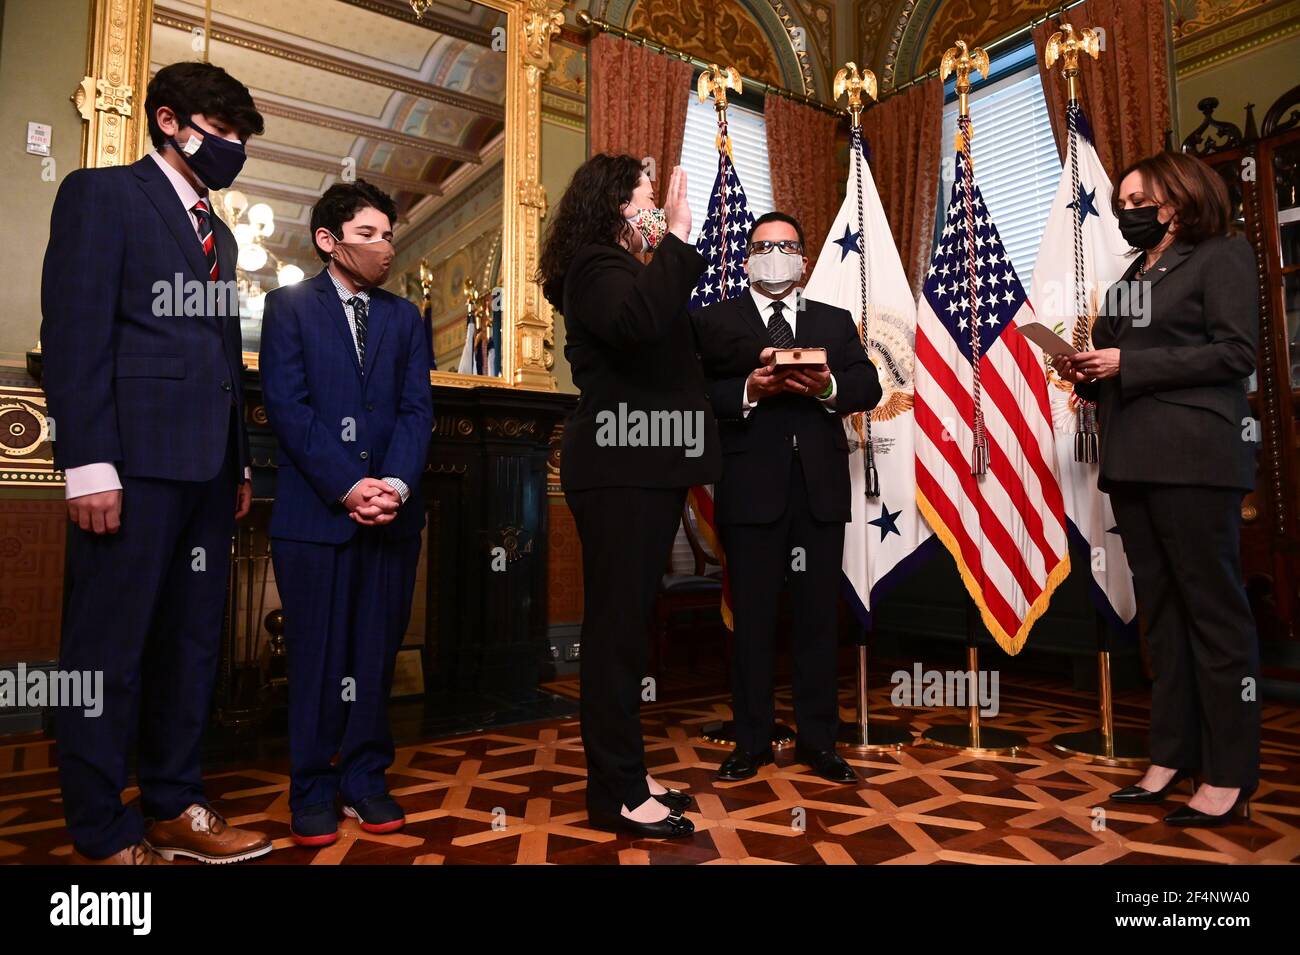 Isabel Guzman, administrator of the U.S. Small Business Administration (SBA), is joined by her husband, Javier Guzman, and sons, Cortez Guzman and Cruz Guzman as she is sworn in by U.S. Vice President Kamala Harris during a ceremony in the Eisenhower Executive Office Building in Washington, DC, U.S., on Monday, March 22, 2021. Guzman served as a deputy chief of staff and senior adviser to the administrator at the SBA during the Obama administration, and has run her own small businesses. Credit: Erin Scott/Pool via CNP /MediaPunch Stock Photo